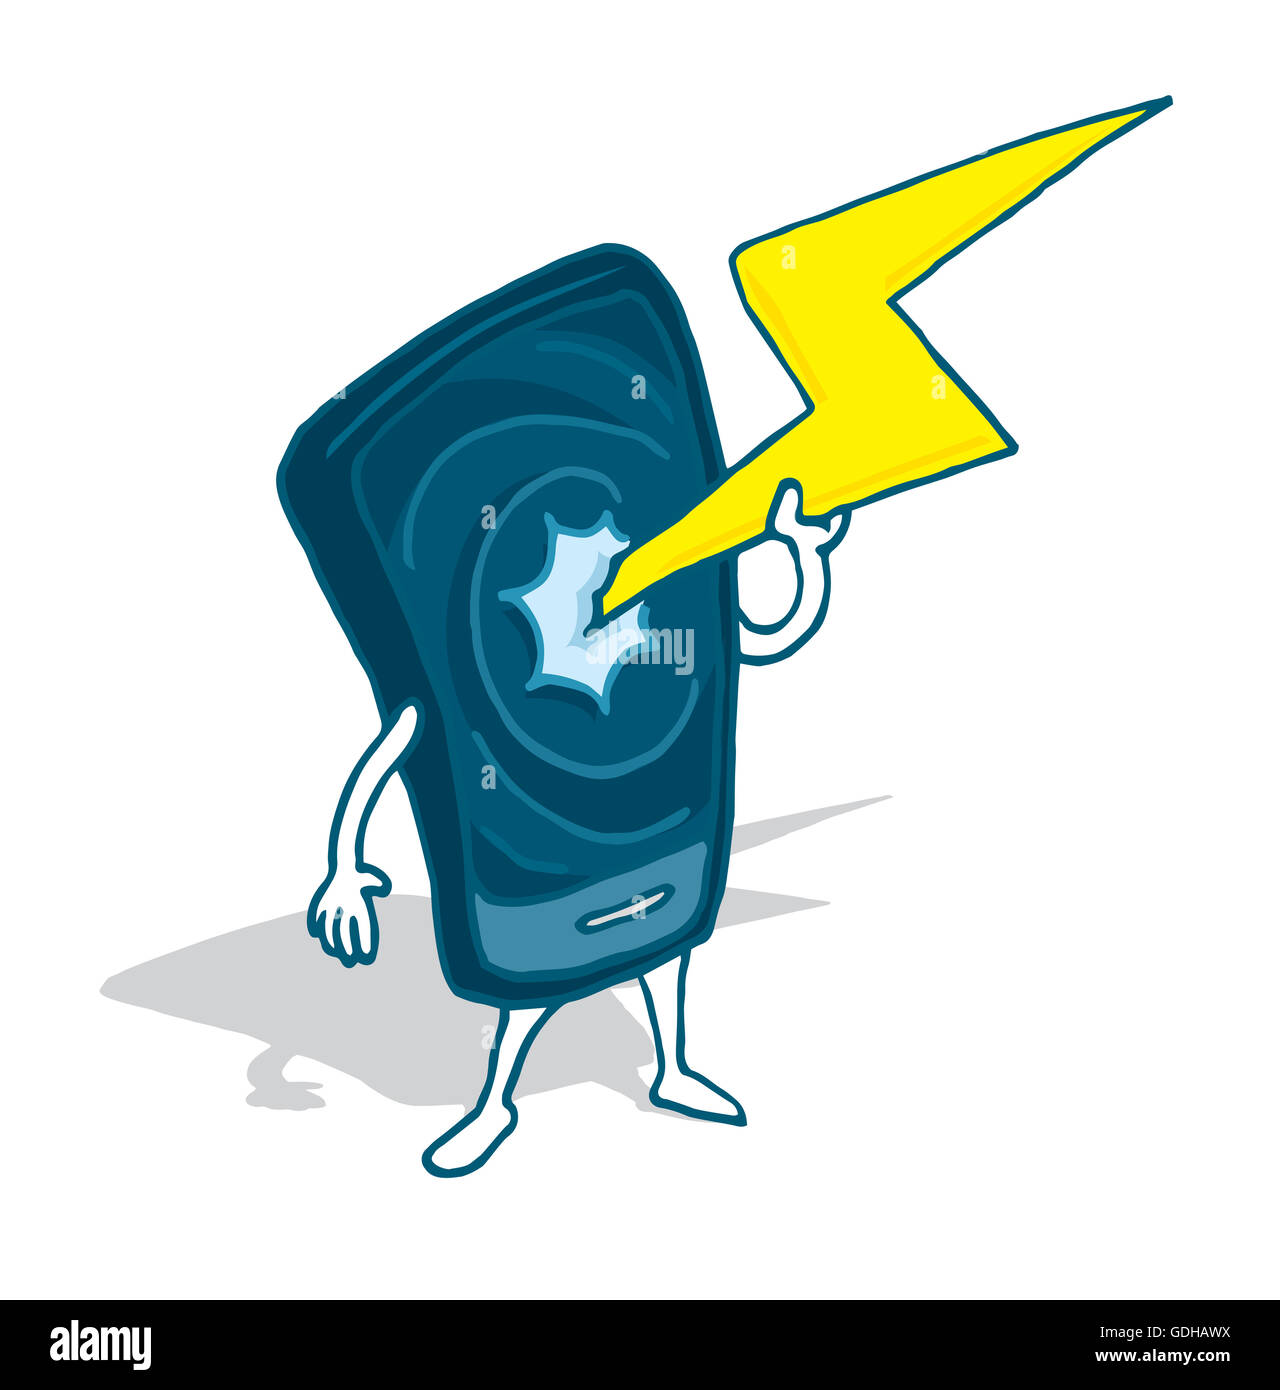 Cartoon illustration of a cell phone charging or draining too much energy Stock Photo